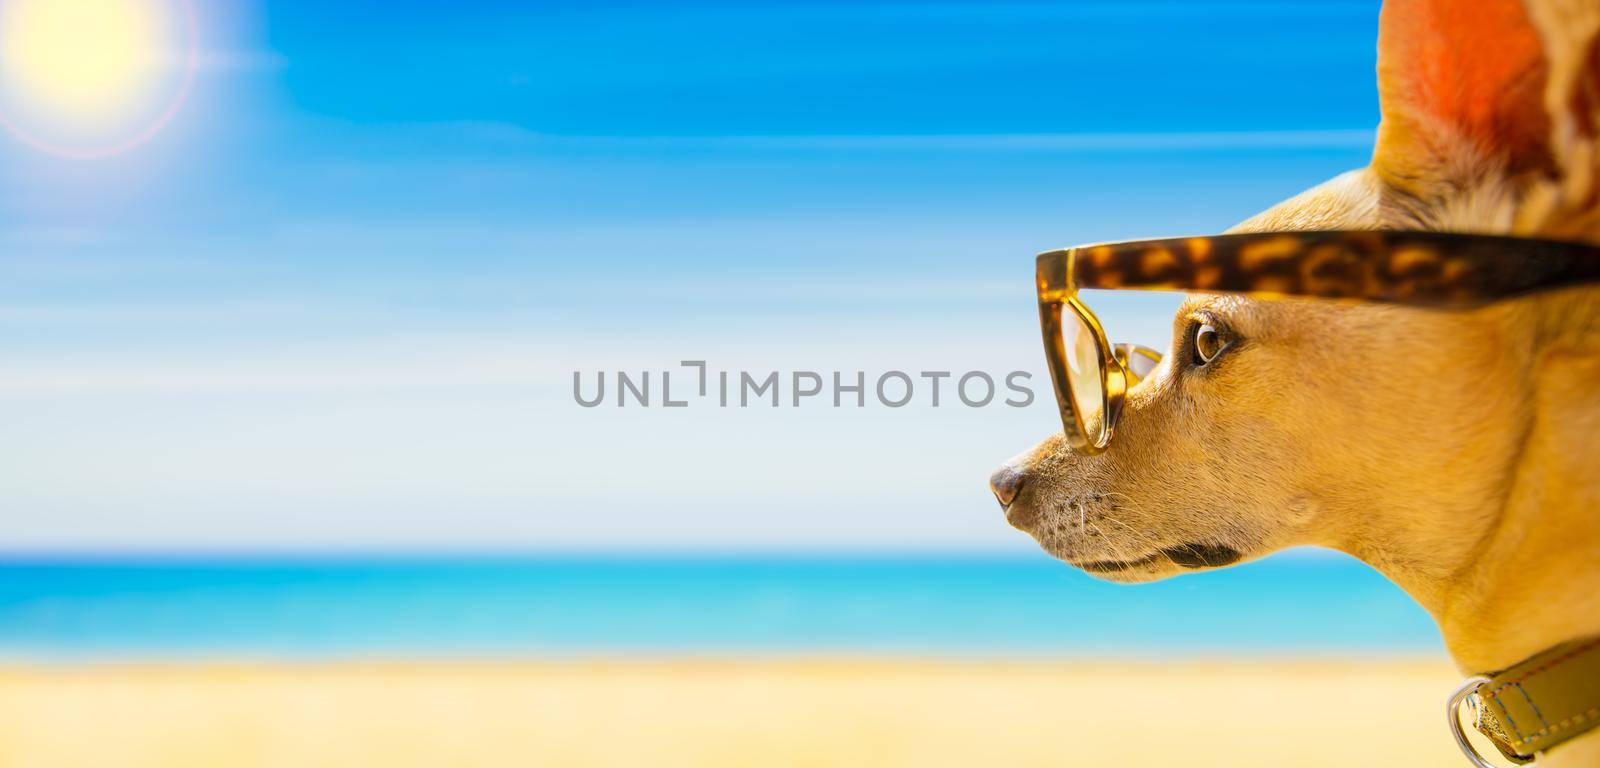 chihuahua dog watching and looking at the beach and ocean wearing funny sunglasses, on summer vacation holiday